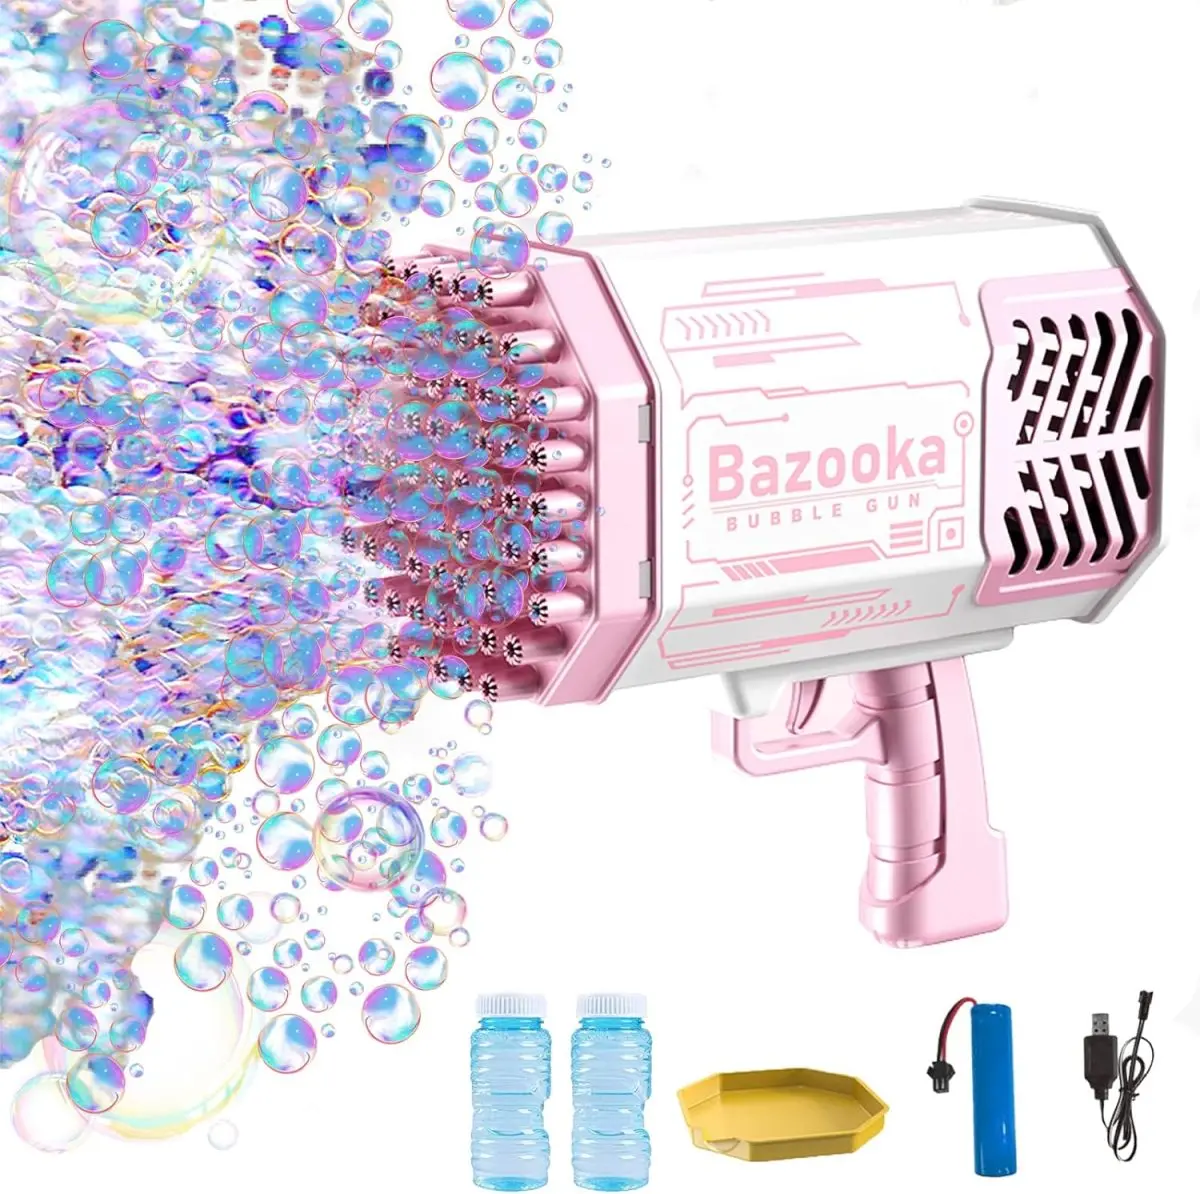 Bubble Machine Gun, Bubble Gun with Lights/Bubble Solution, 69 Holes Bubbles Machine for Adults Kids, for Kids Adults Summer Outdoor Birthday Wedding Party Activity((Pink)